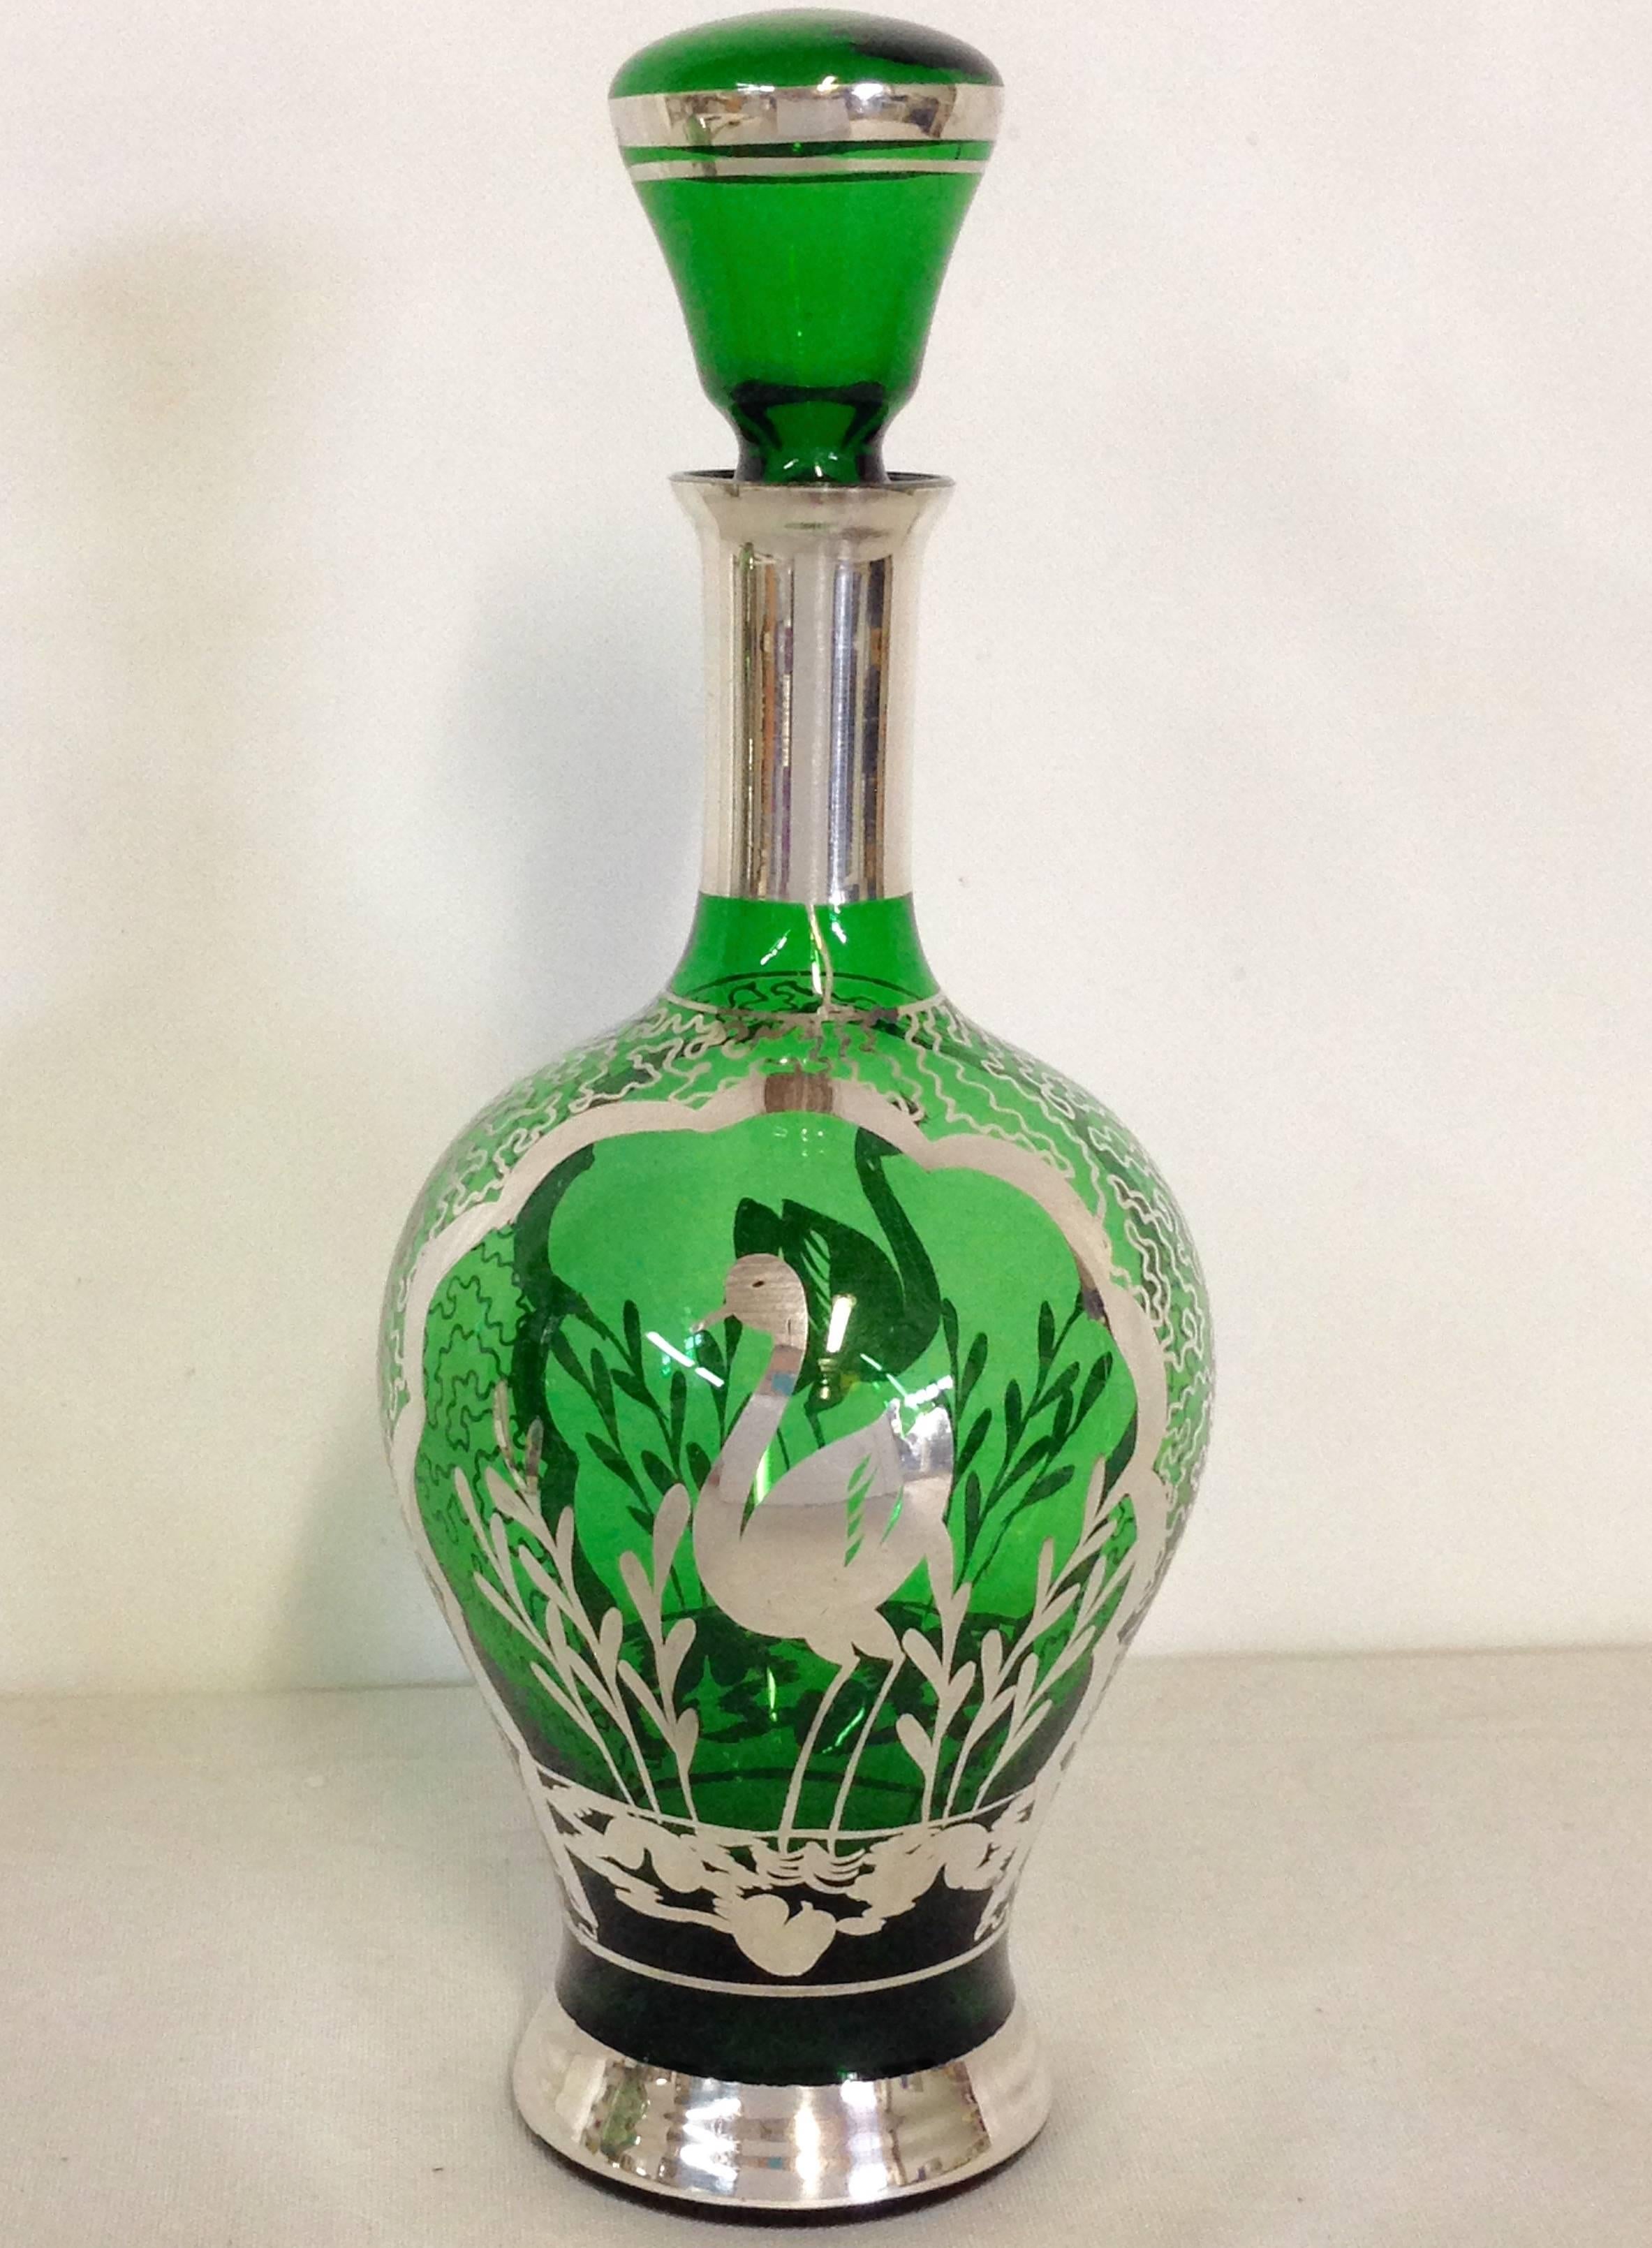 Unique pair of emerald and heavy sterling silver-overlay decanters with ornate grassy water and crane motif.